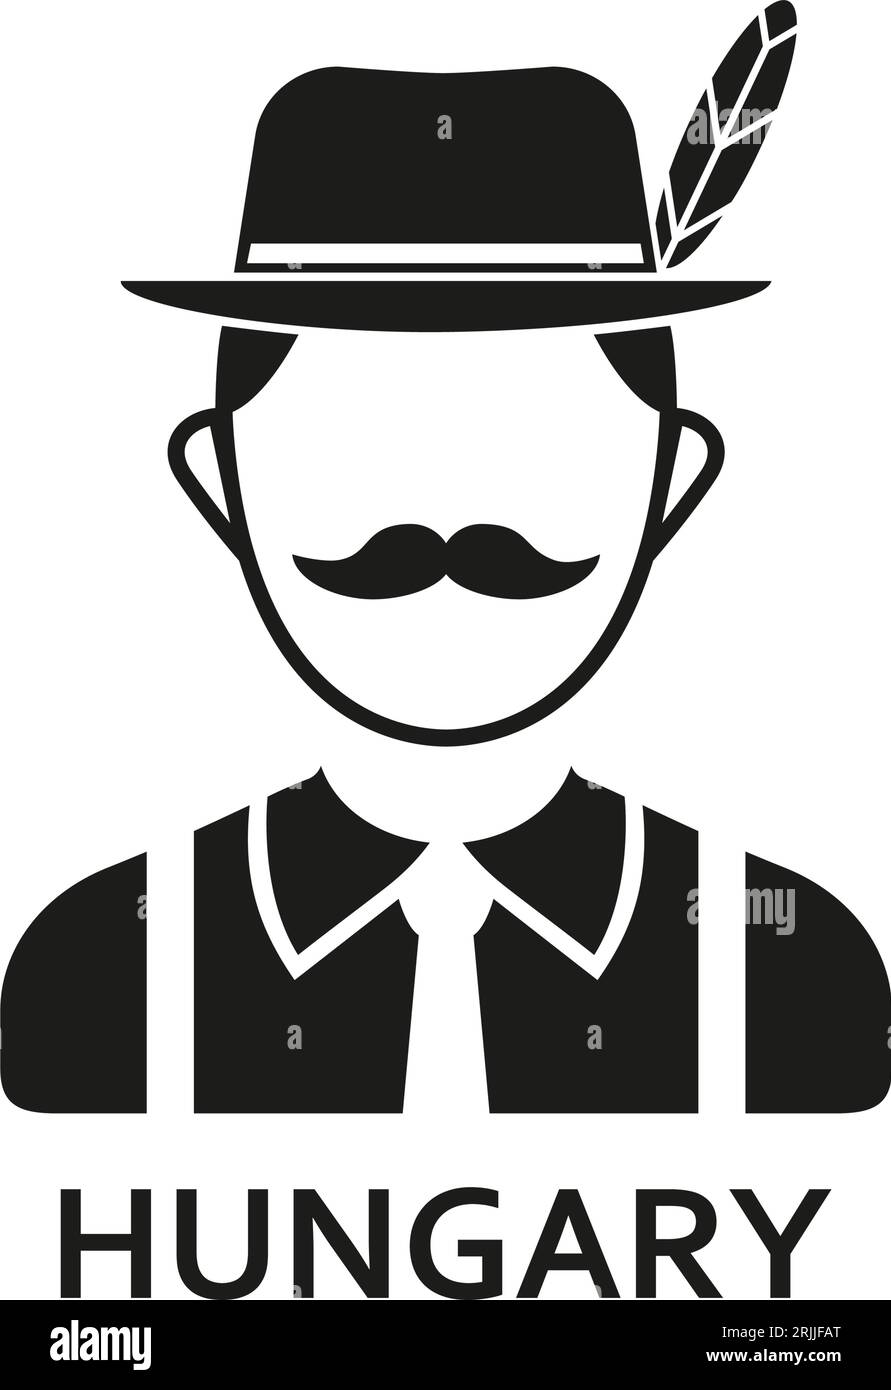 Man in hat with Hungary lettering icon Stock Vector